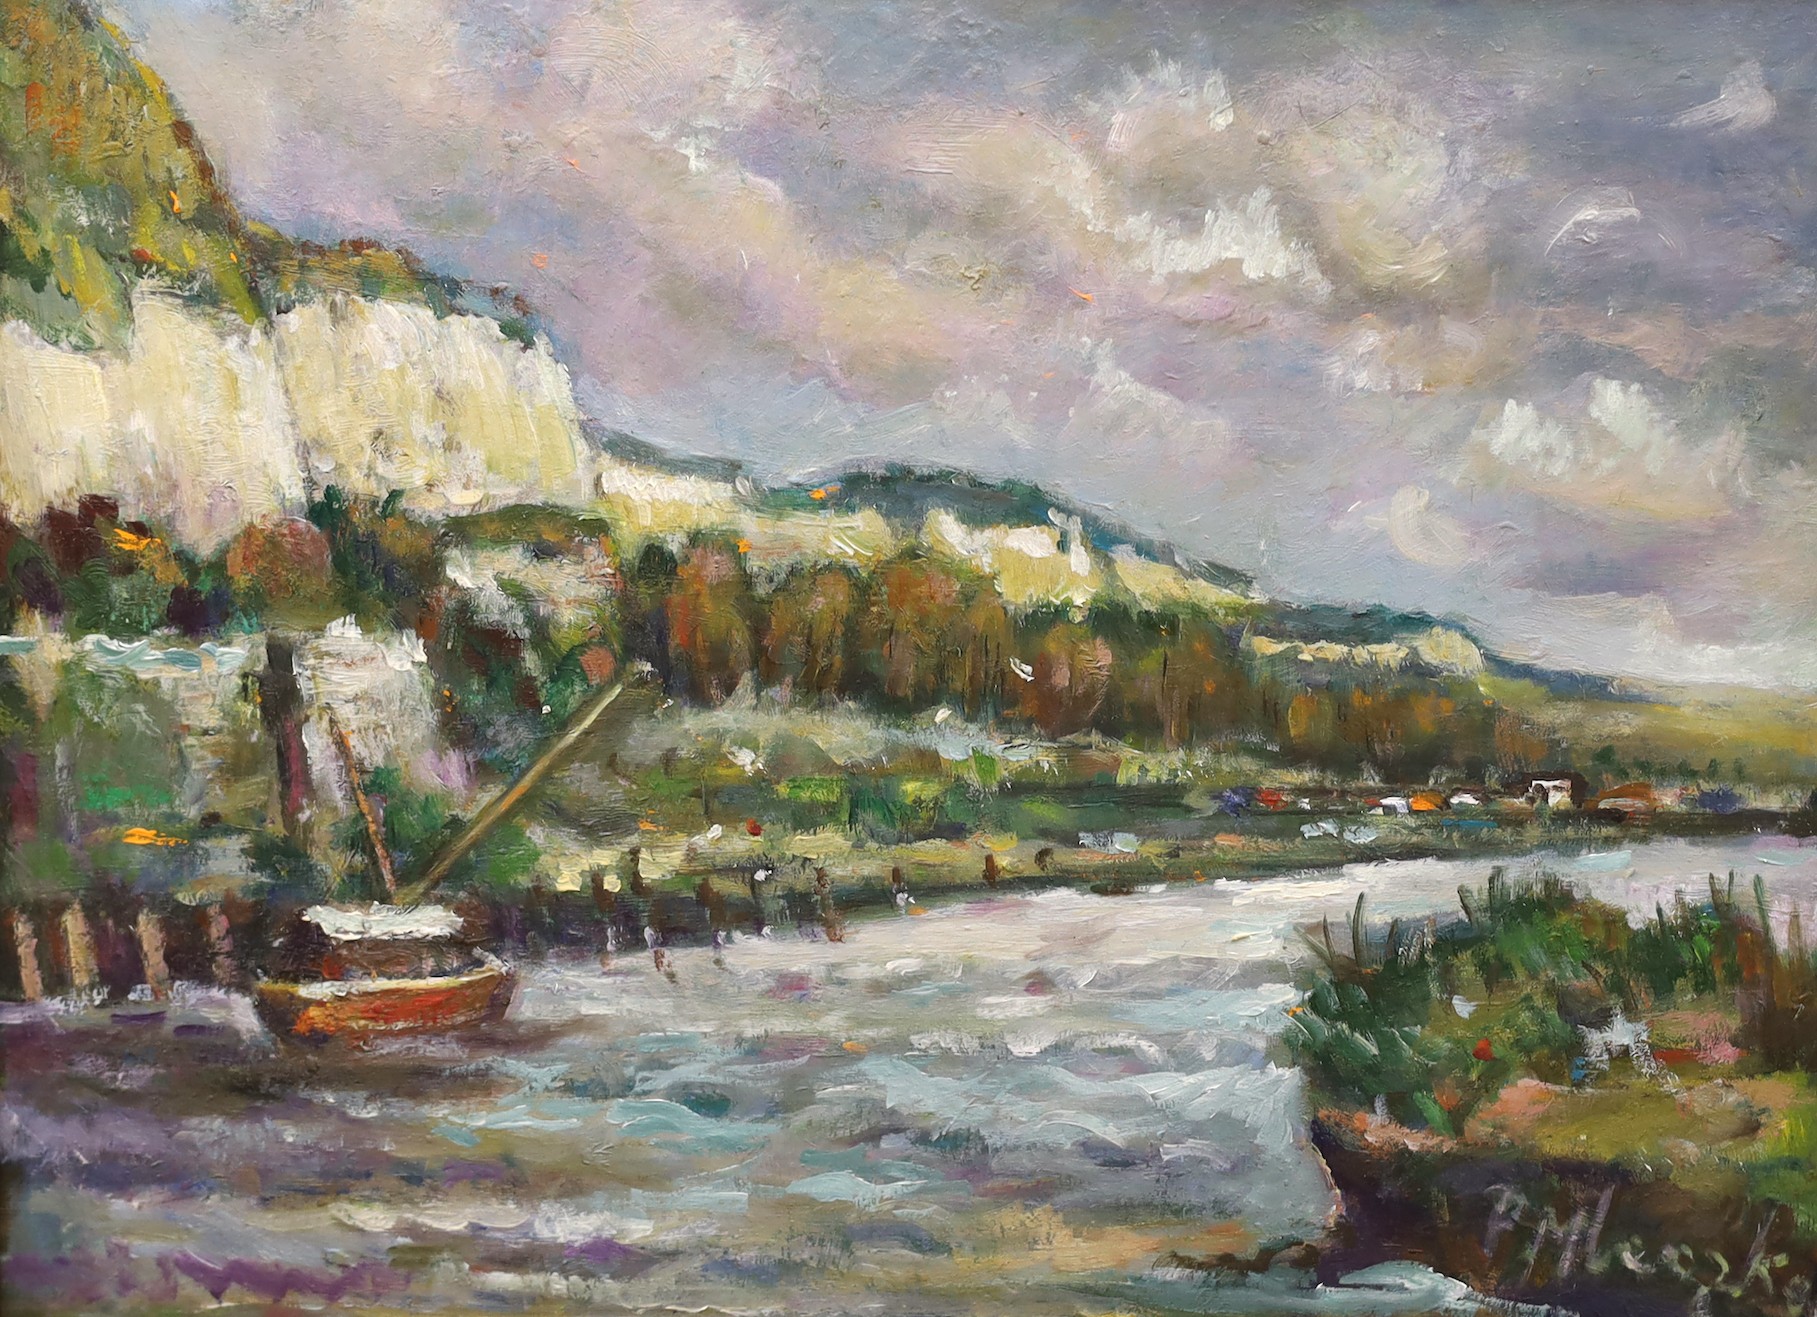 Peter Mleczko, oil on board, 'River Ouse and Cliffe, Lewes', signed, 30 x 39cm